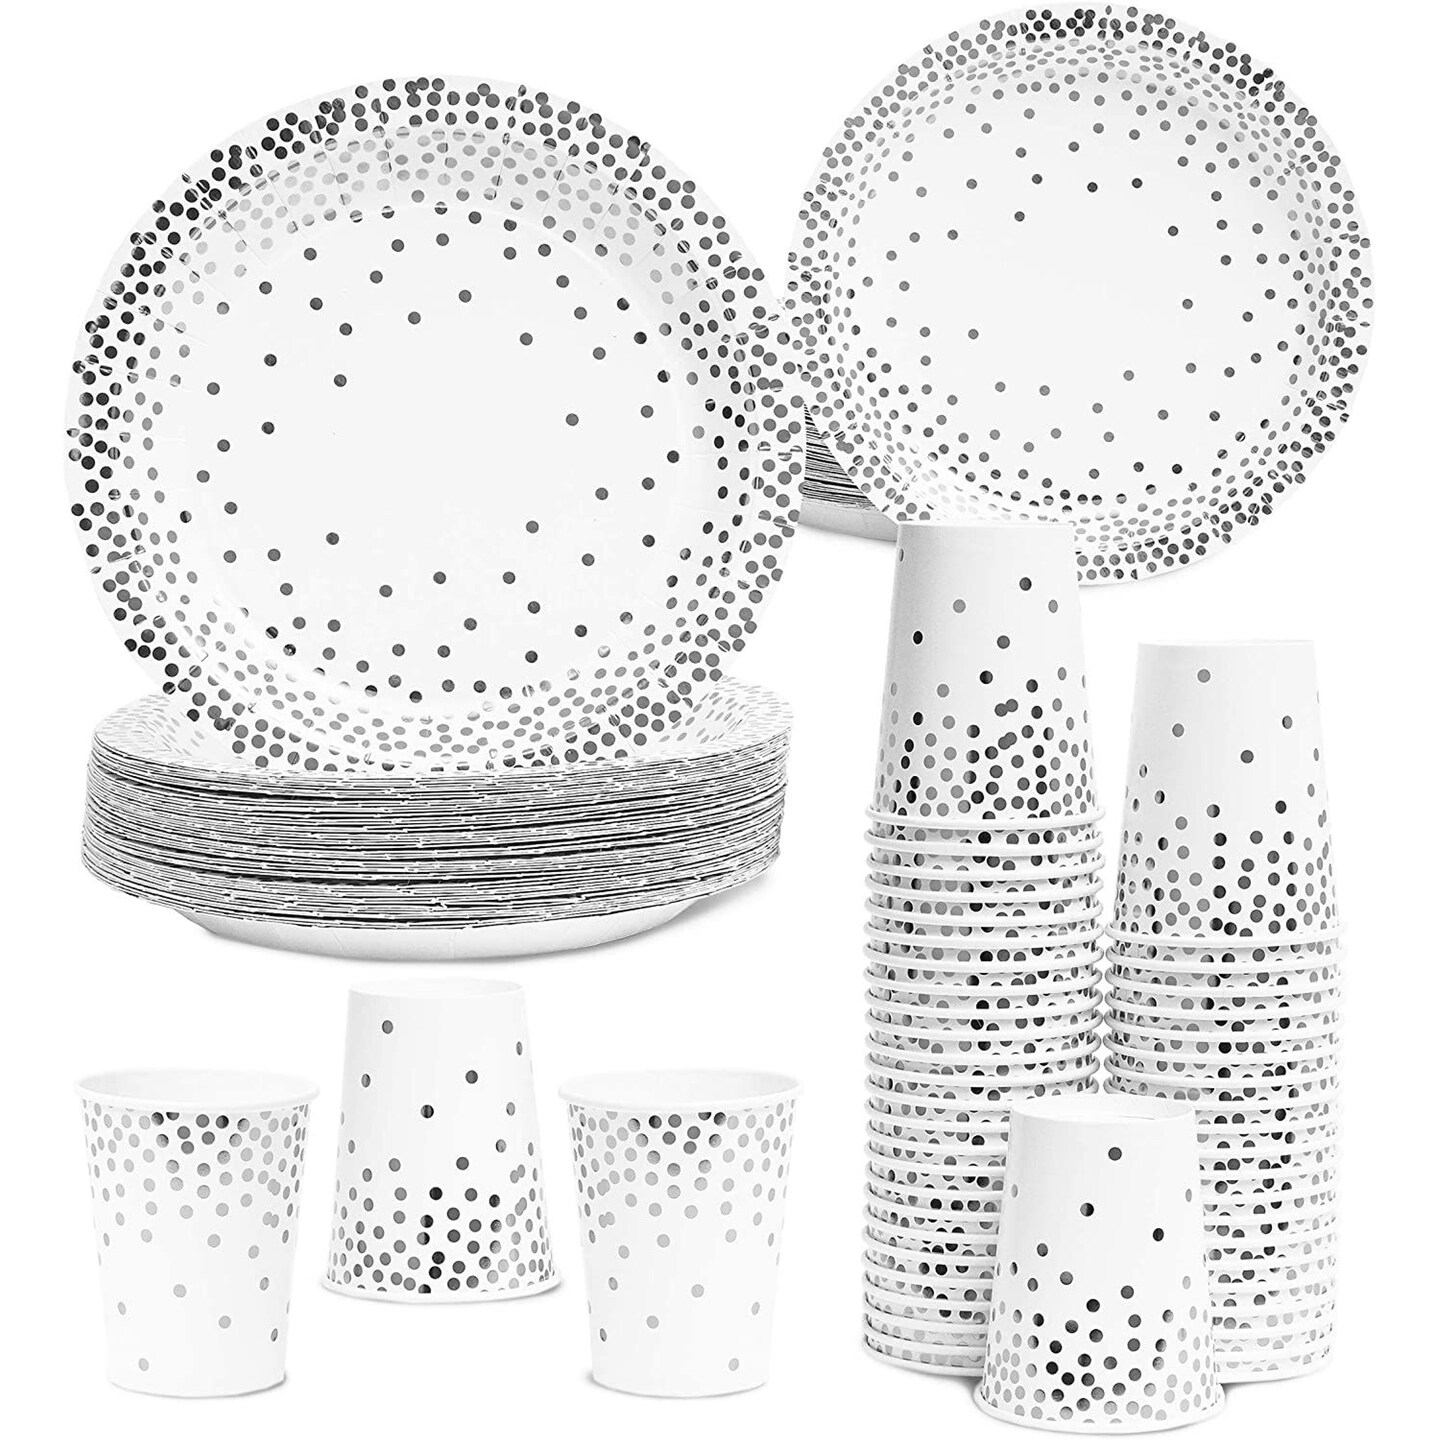 Serves 50 Silver Party Supplies - 150 Piece Disposable Paper Dinner Plates, Dessert Plates and Cups for Wedding, Birthday Party Table Decorations